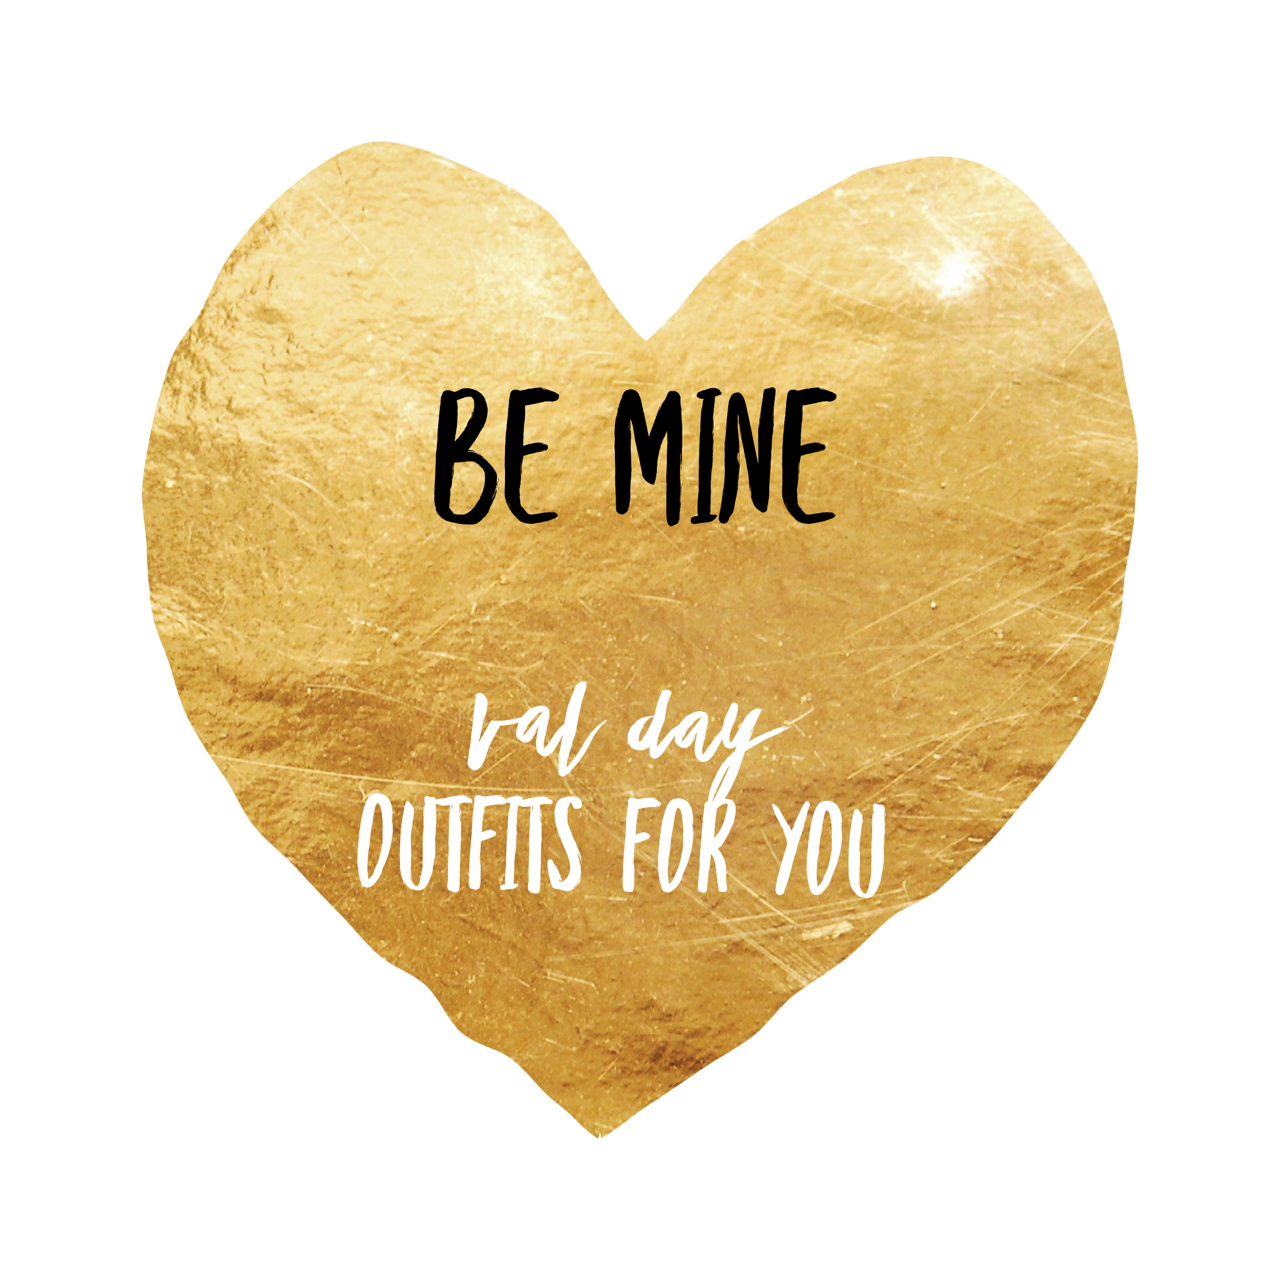 BE MINE!  EFFORTLESS Valentine's Day LOOKS FOR YOU